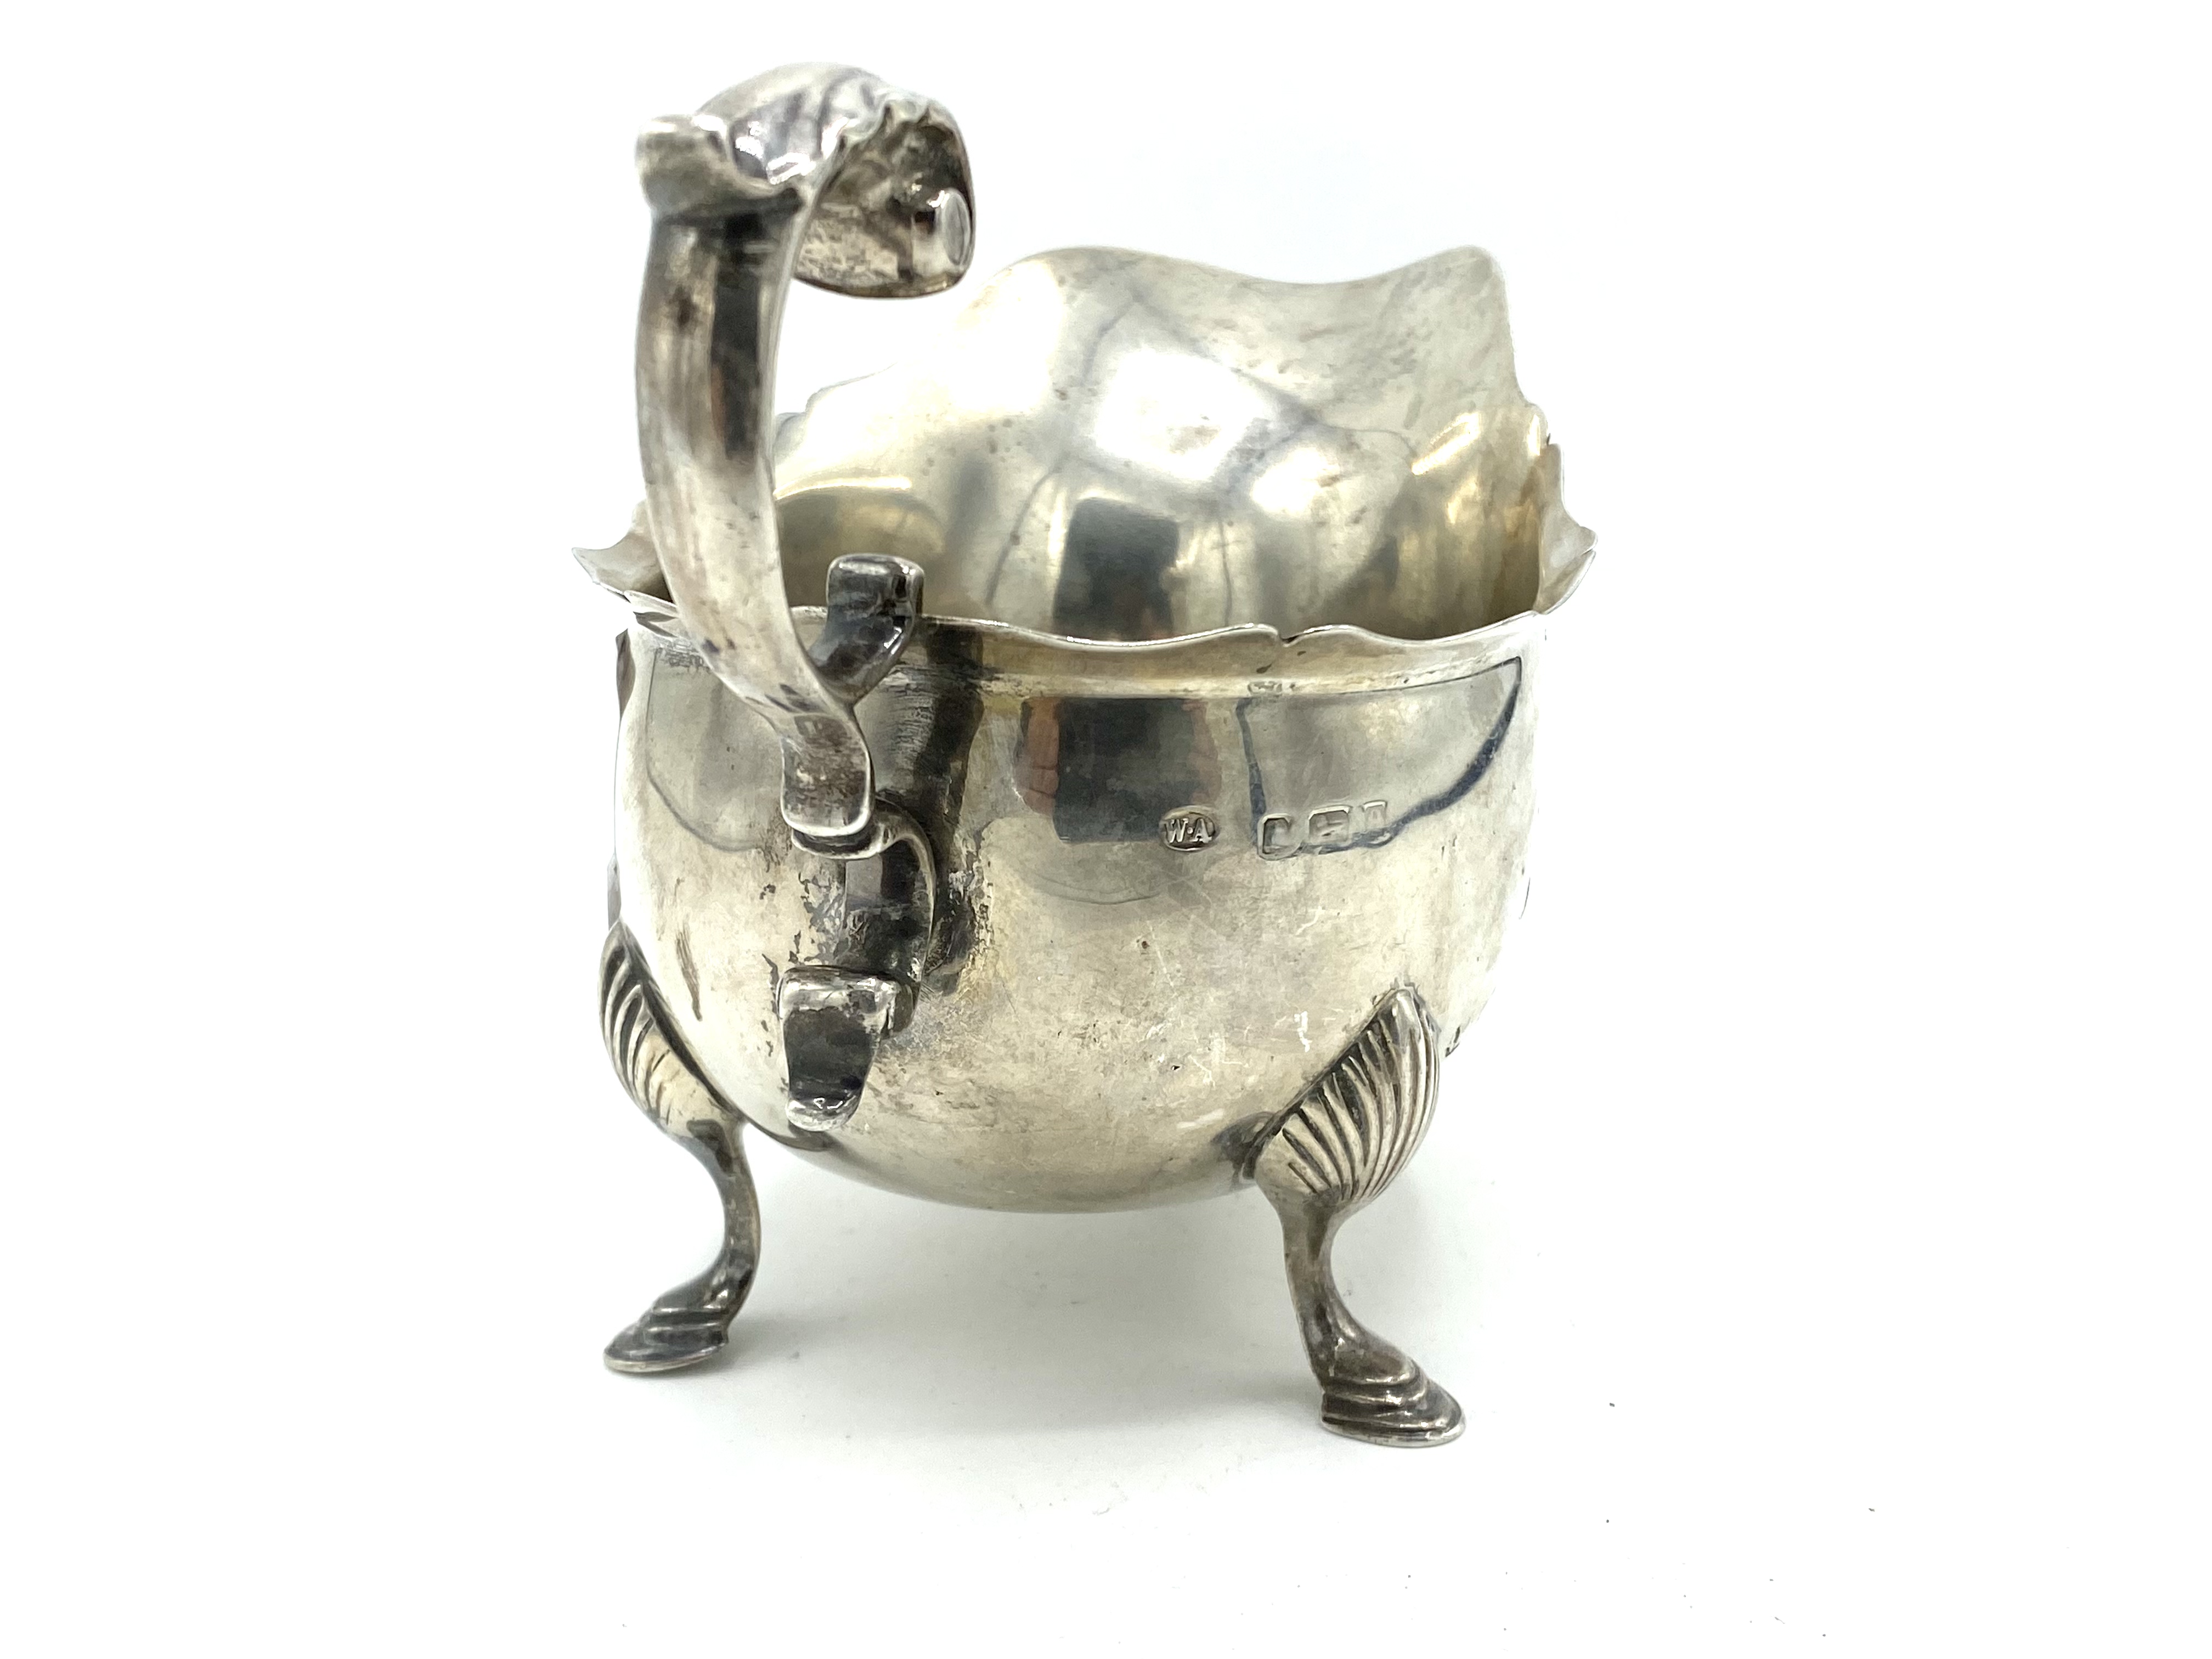 Silver sauce boat, 1951 by William Aitkin & Son - Image 3 of 4